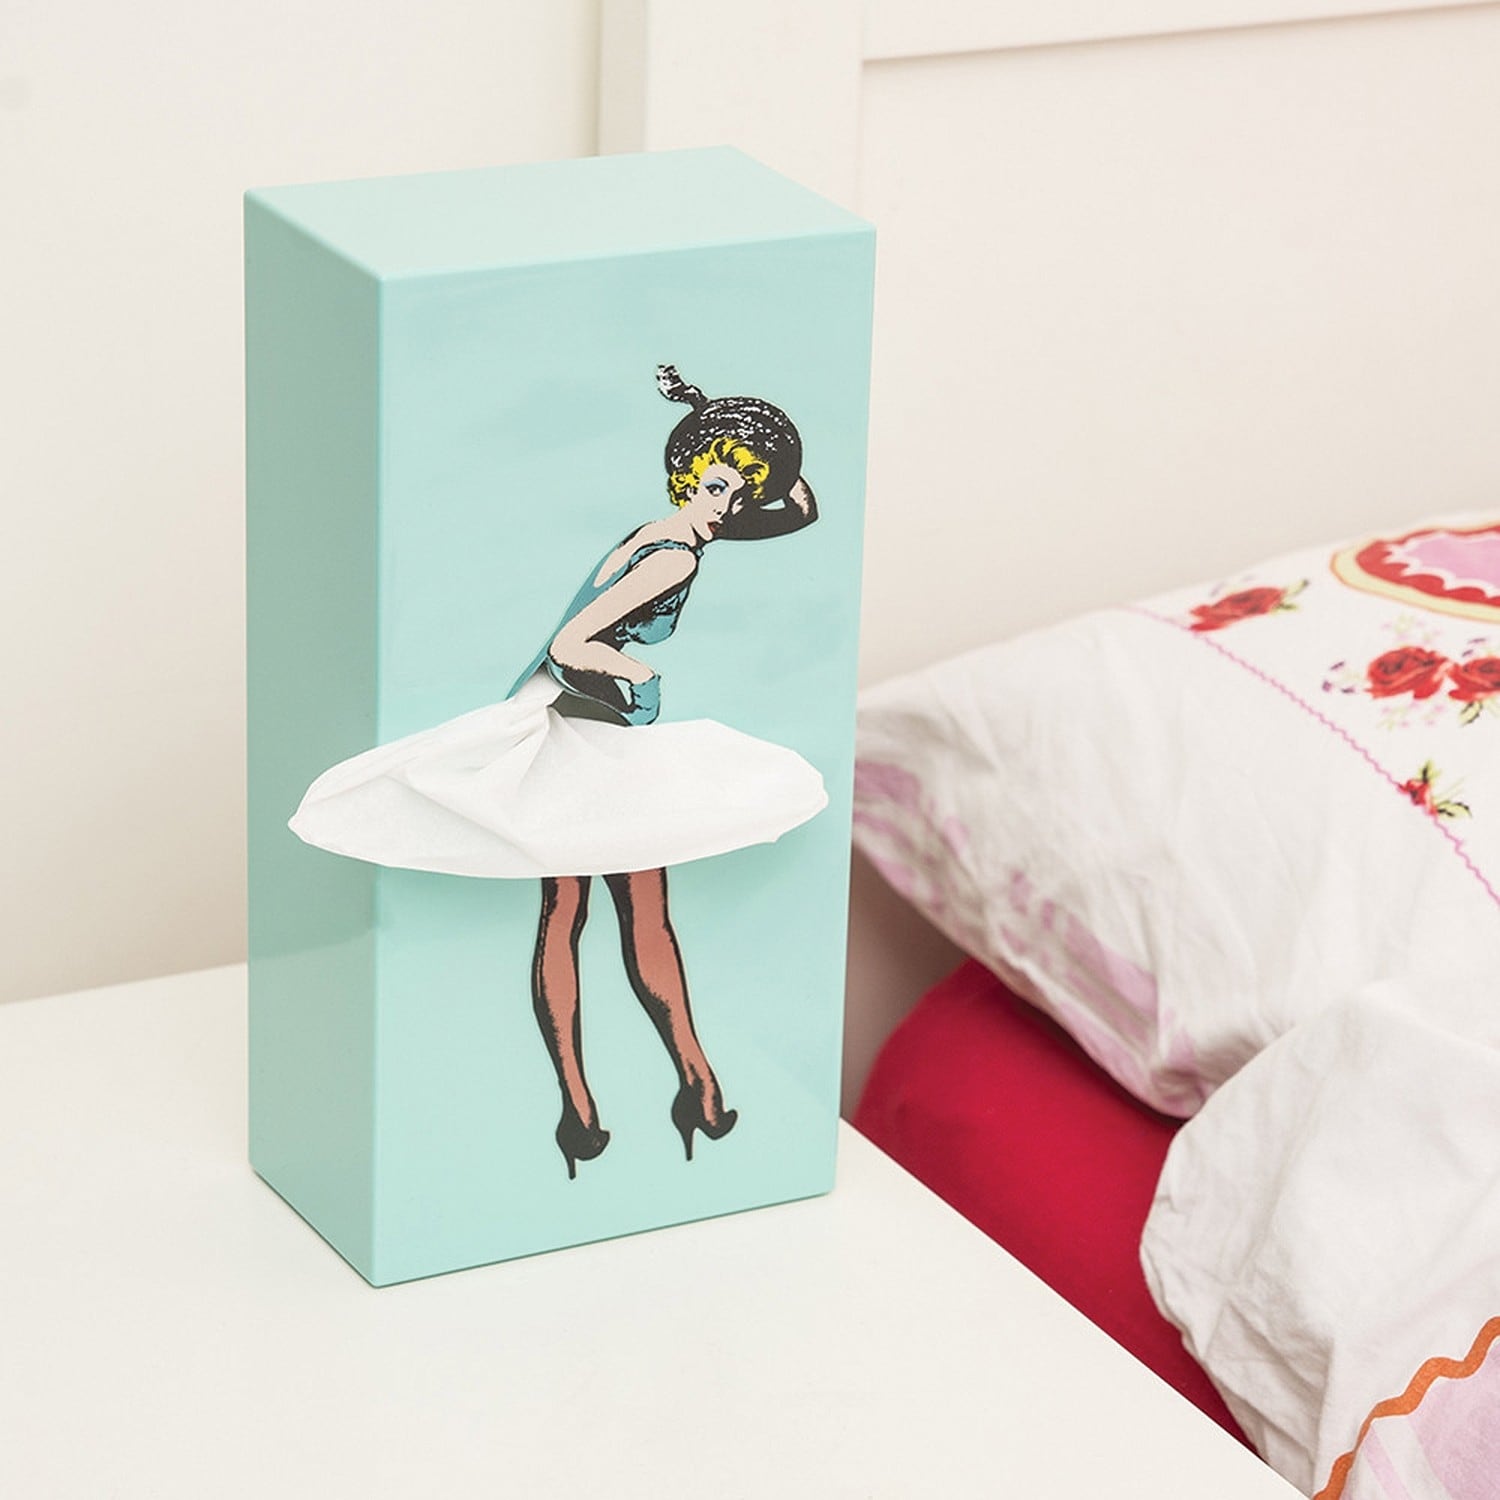 What On Earth Pin Up Girl Tissue Box Cover - Vintage Lady with Flying Skirt  Napkin Holder/Dispenser - Bed Bath & Beyond - 26972436